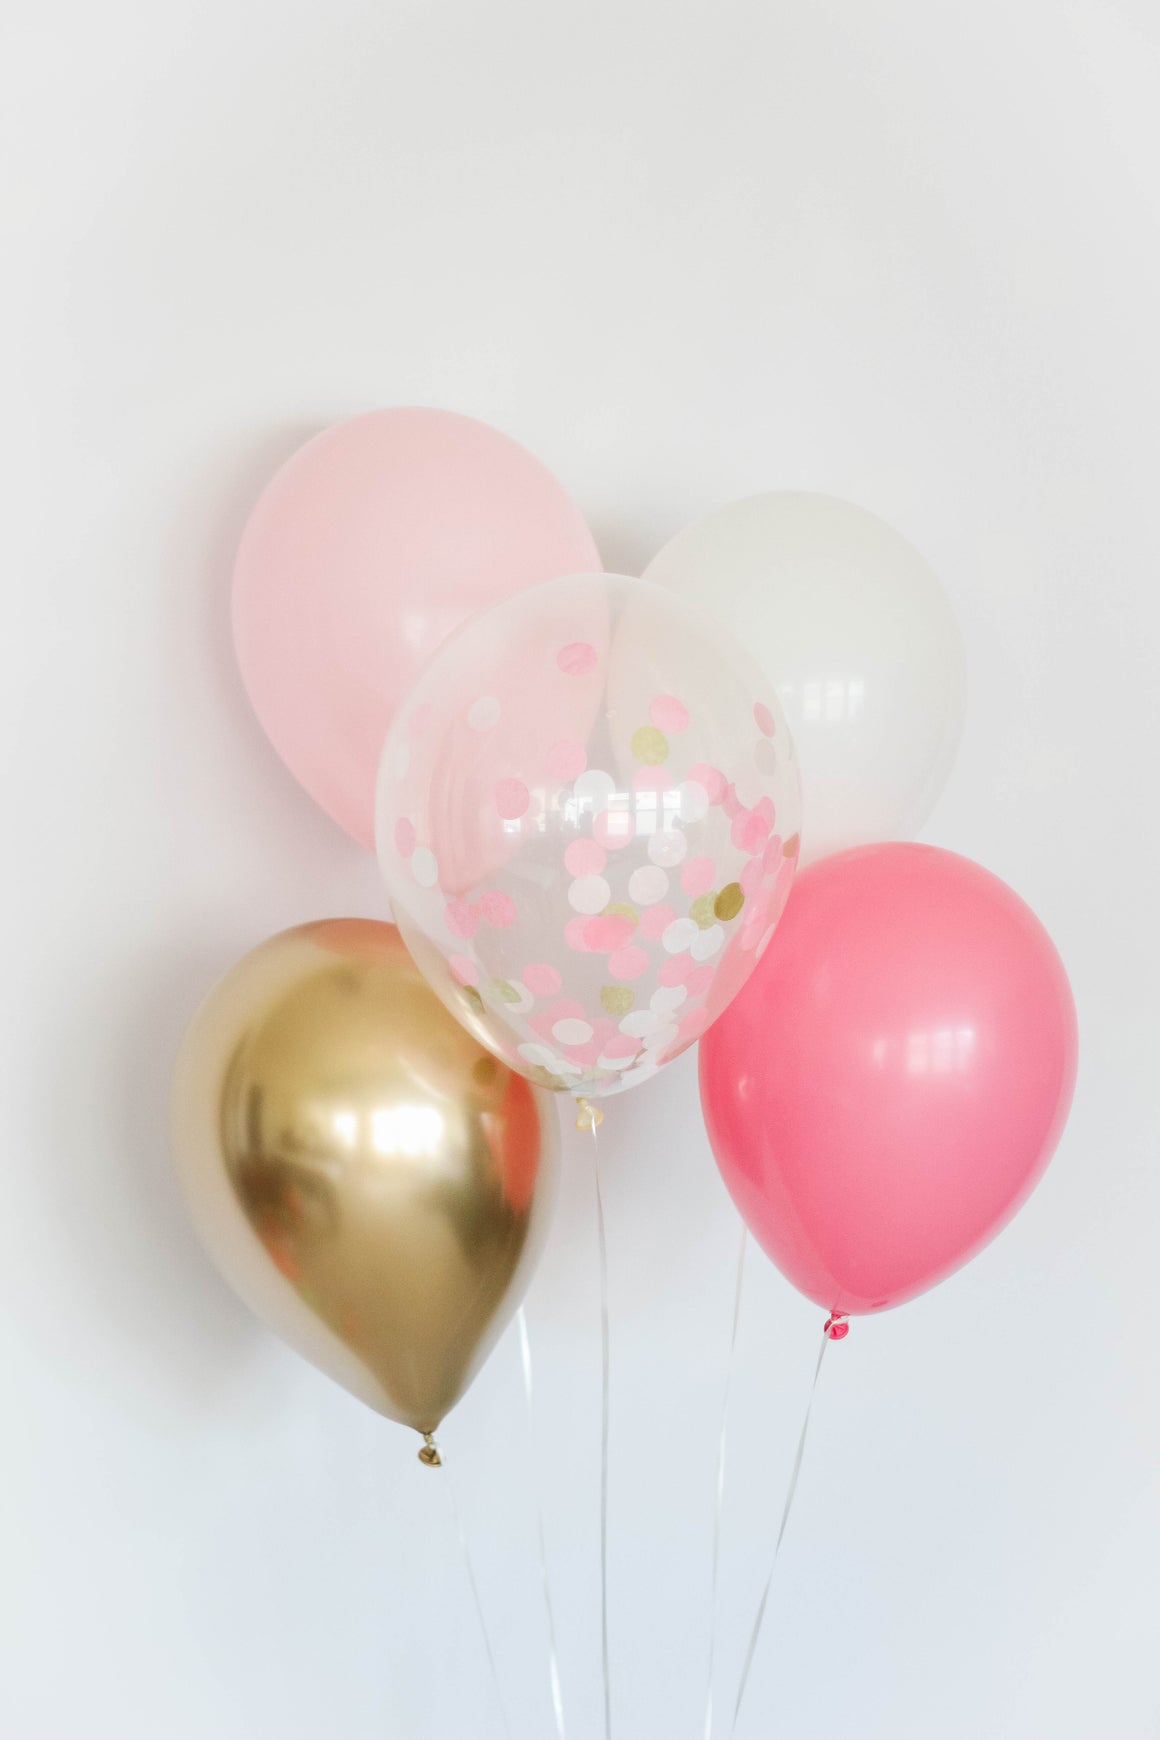 A five balloon bundle with one pink, one rose, one white, one chrome gold, and one confetti filled balloon in front of a white wall.